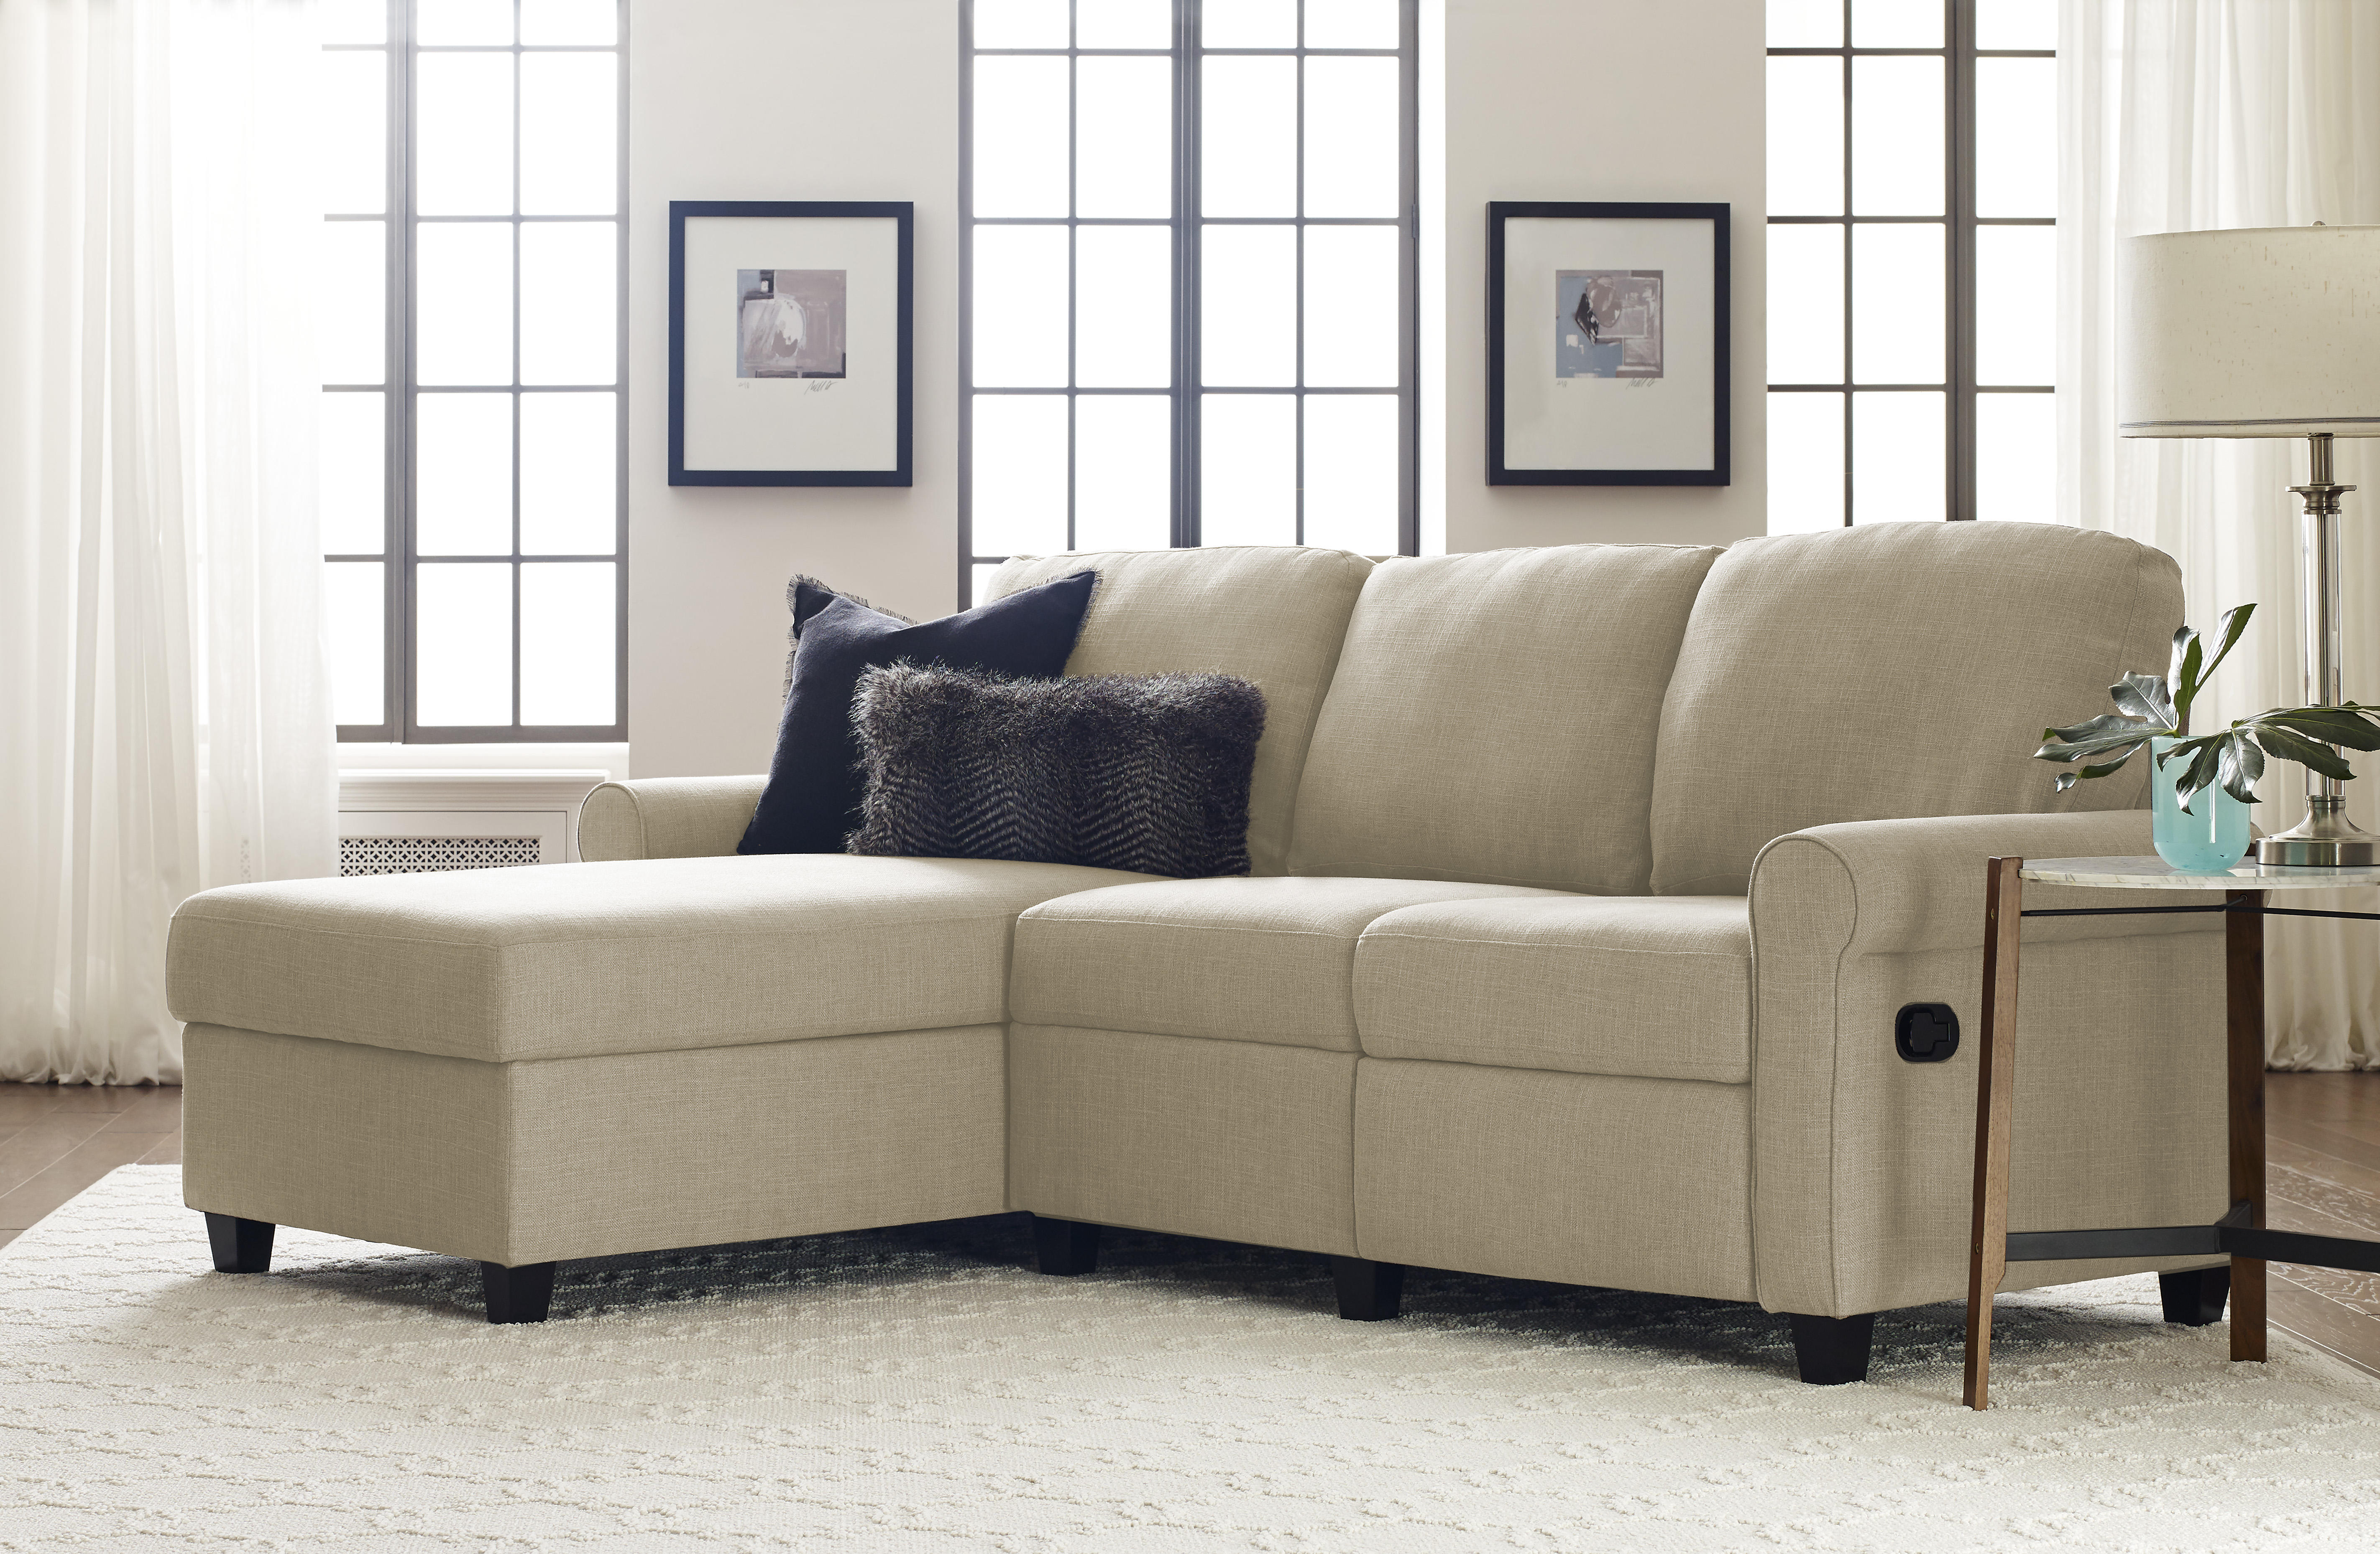 Serta Copenhagen Reclining Sectional with Left Storage Chaise - Oatmeal - image 3 of 9